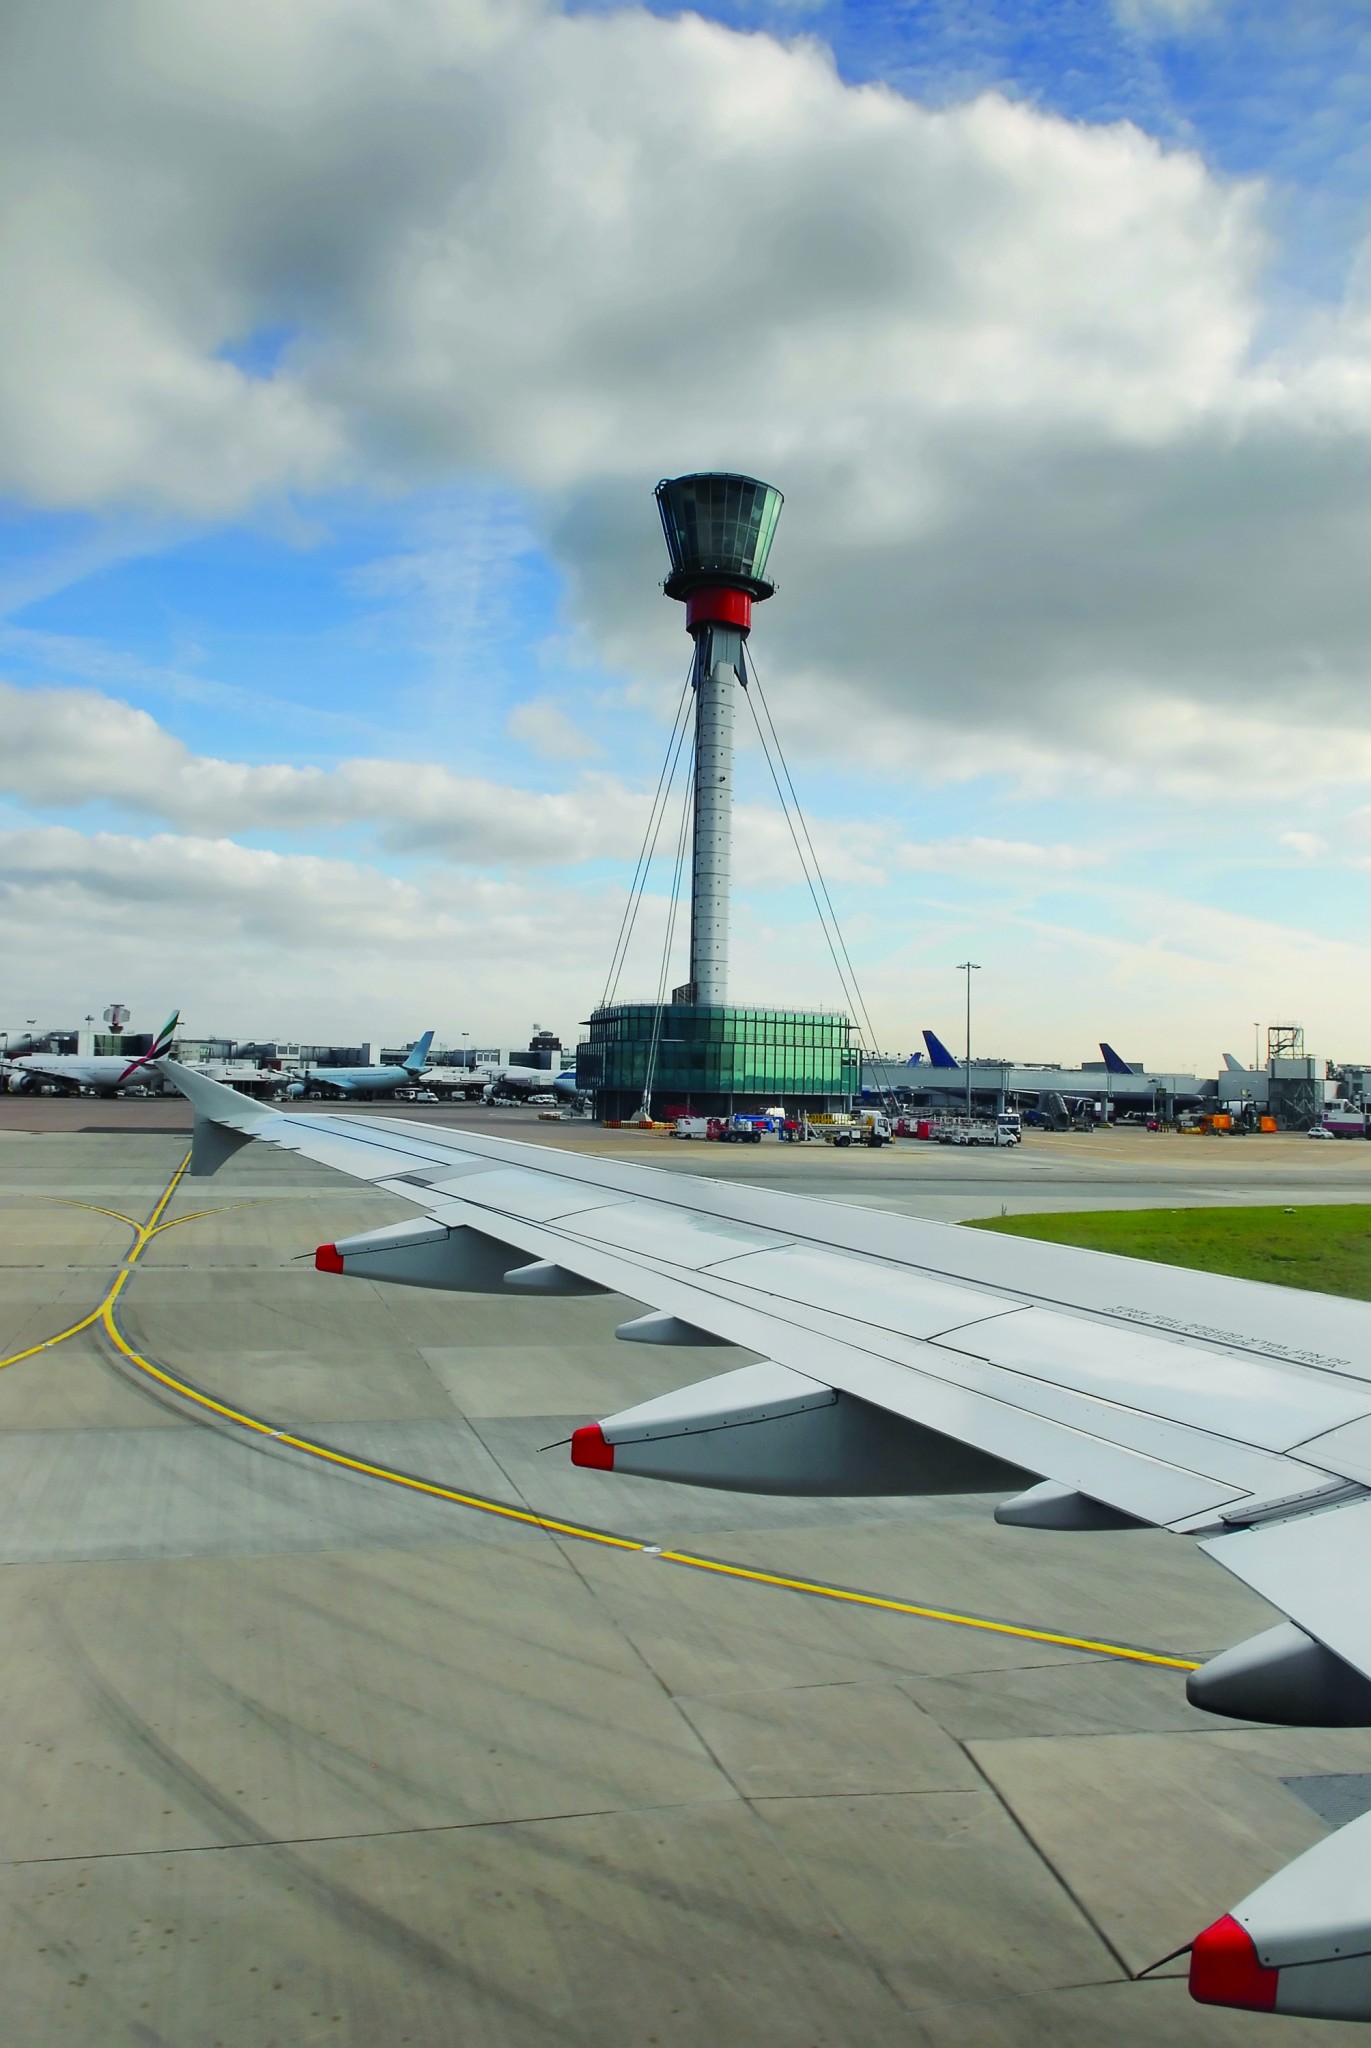 New trade data shows Heathrow’s pivotal role